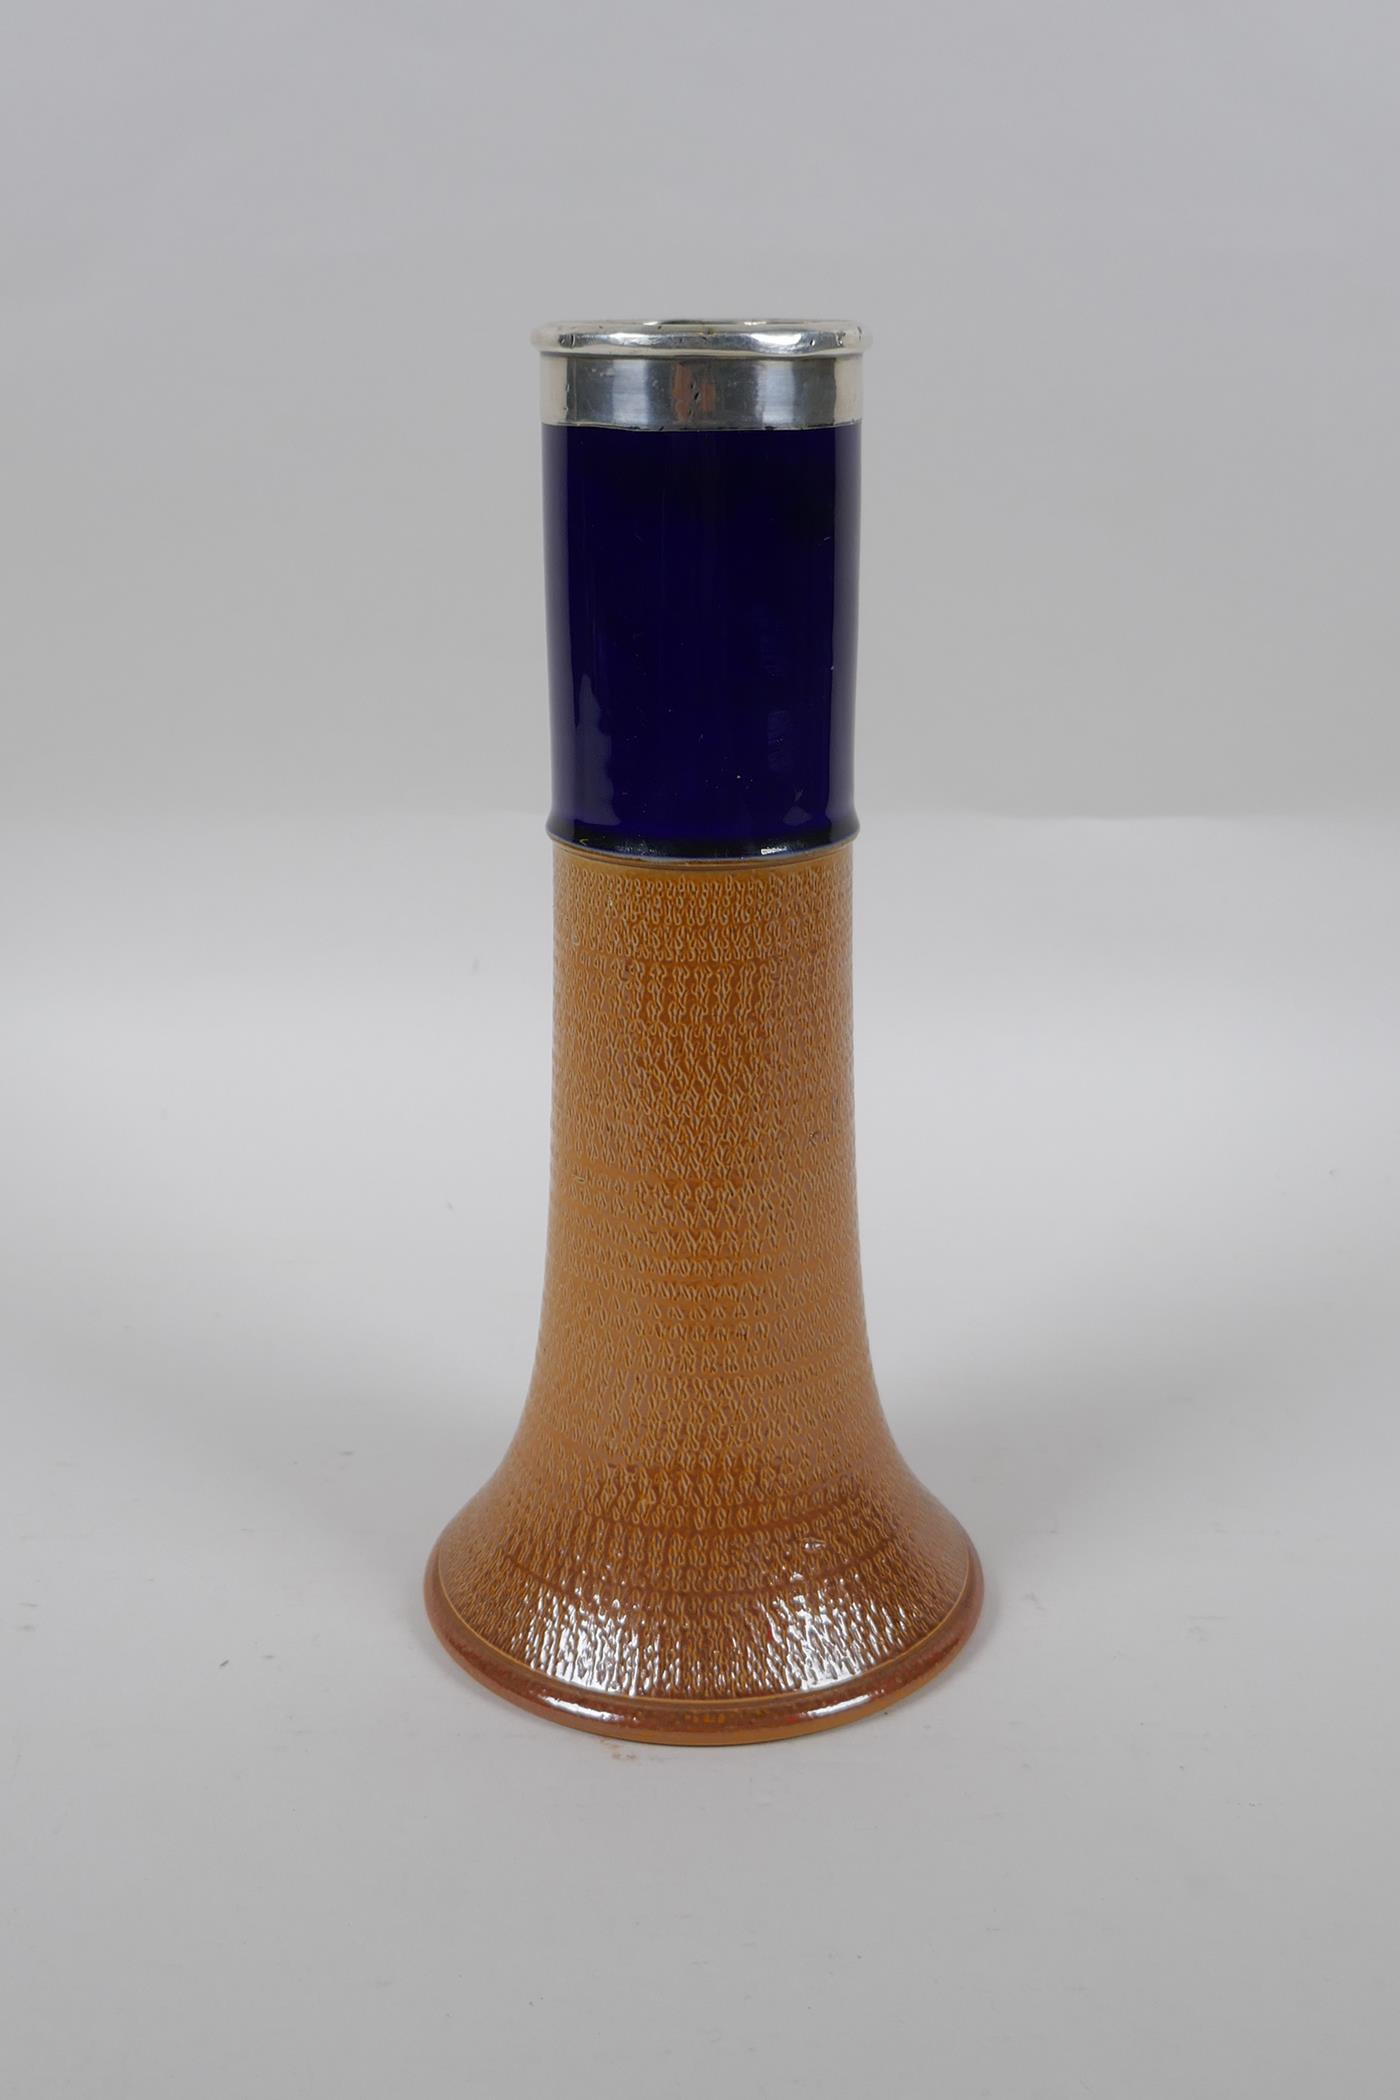 An antique Doulton Lambeth vase with blue glazed band and a hallmarked silver collar, (London, 1915) - Image 2 of 4